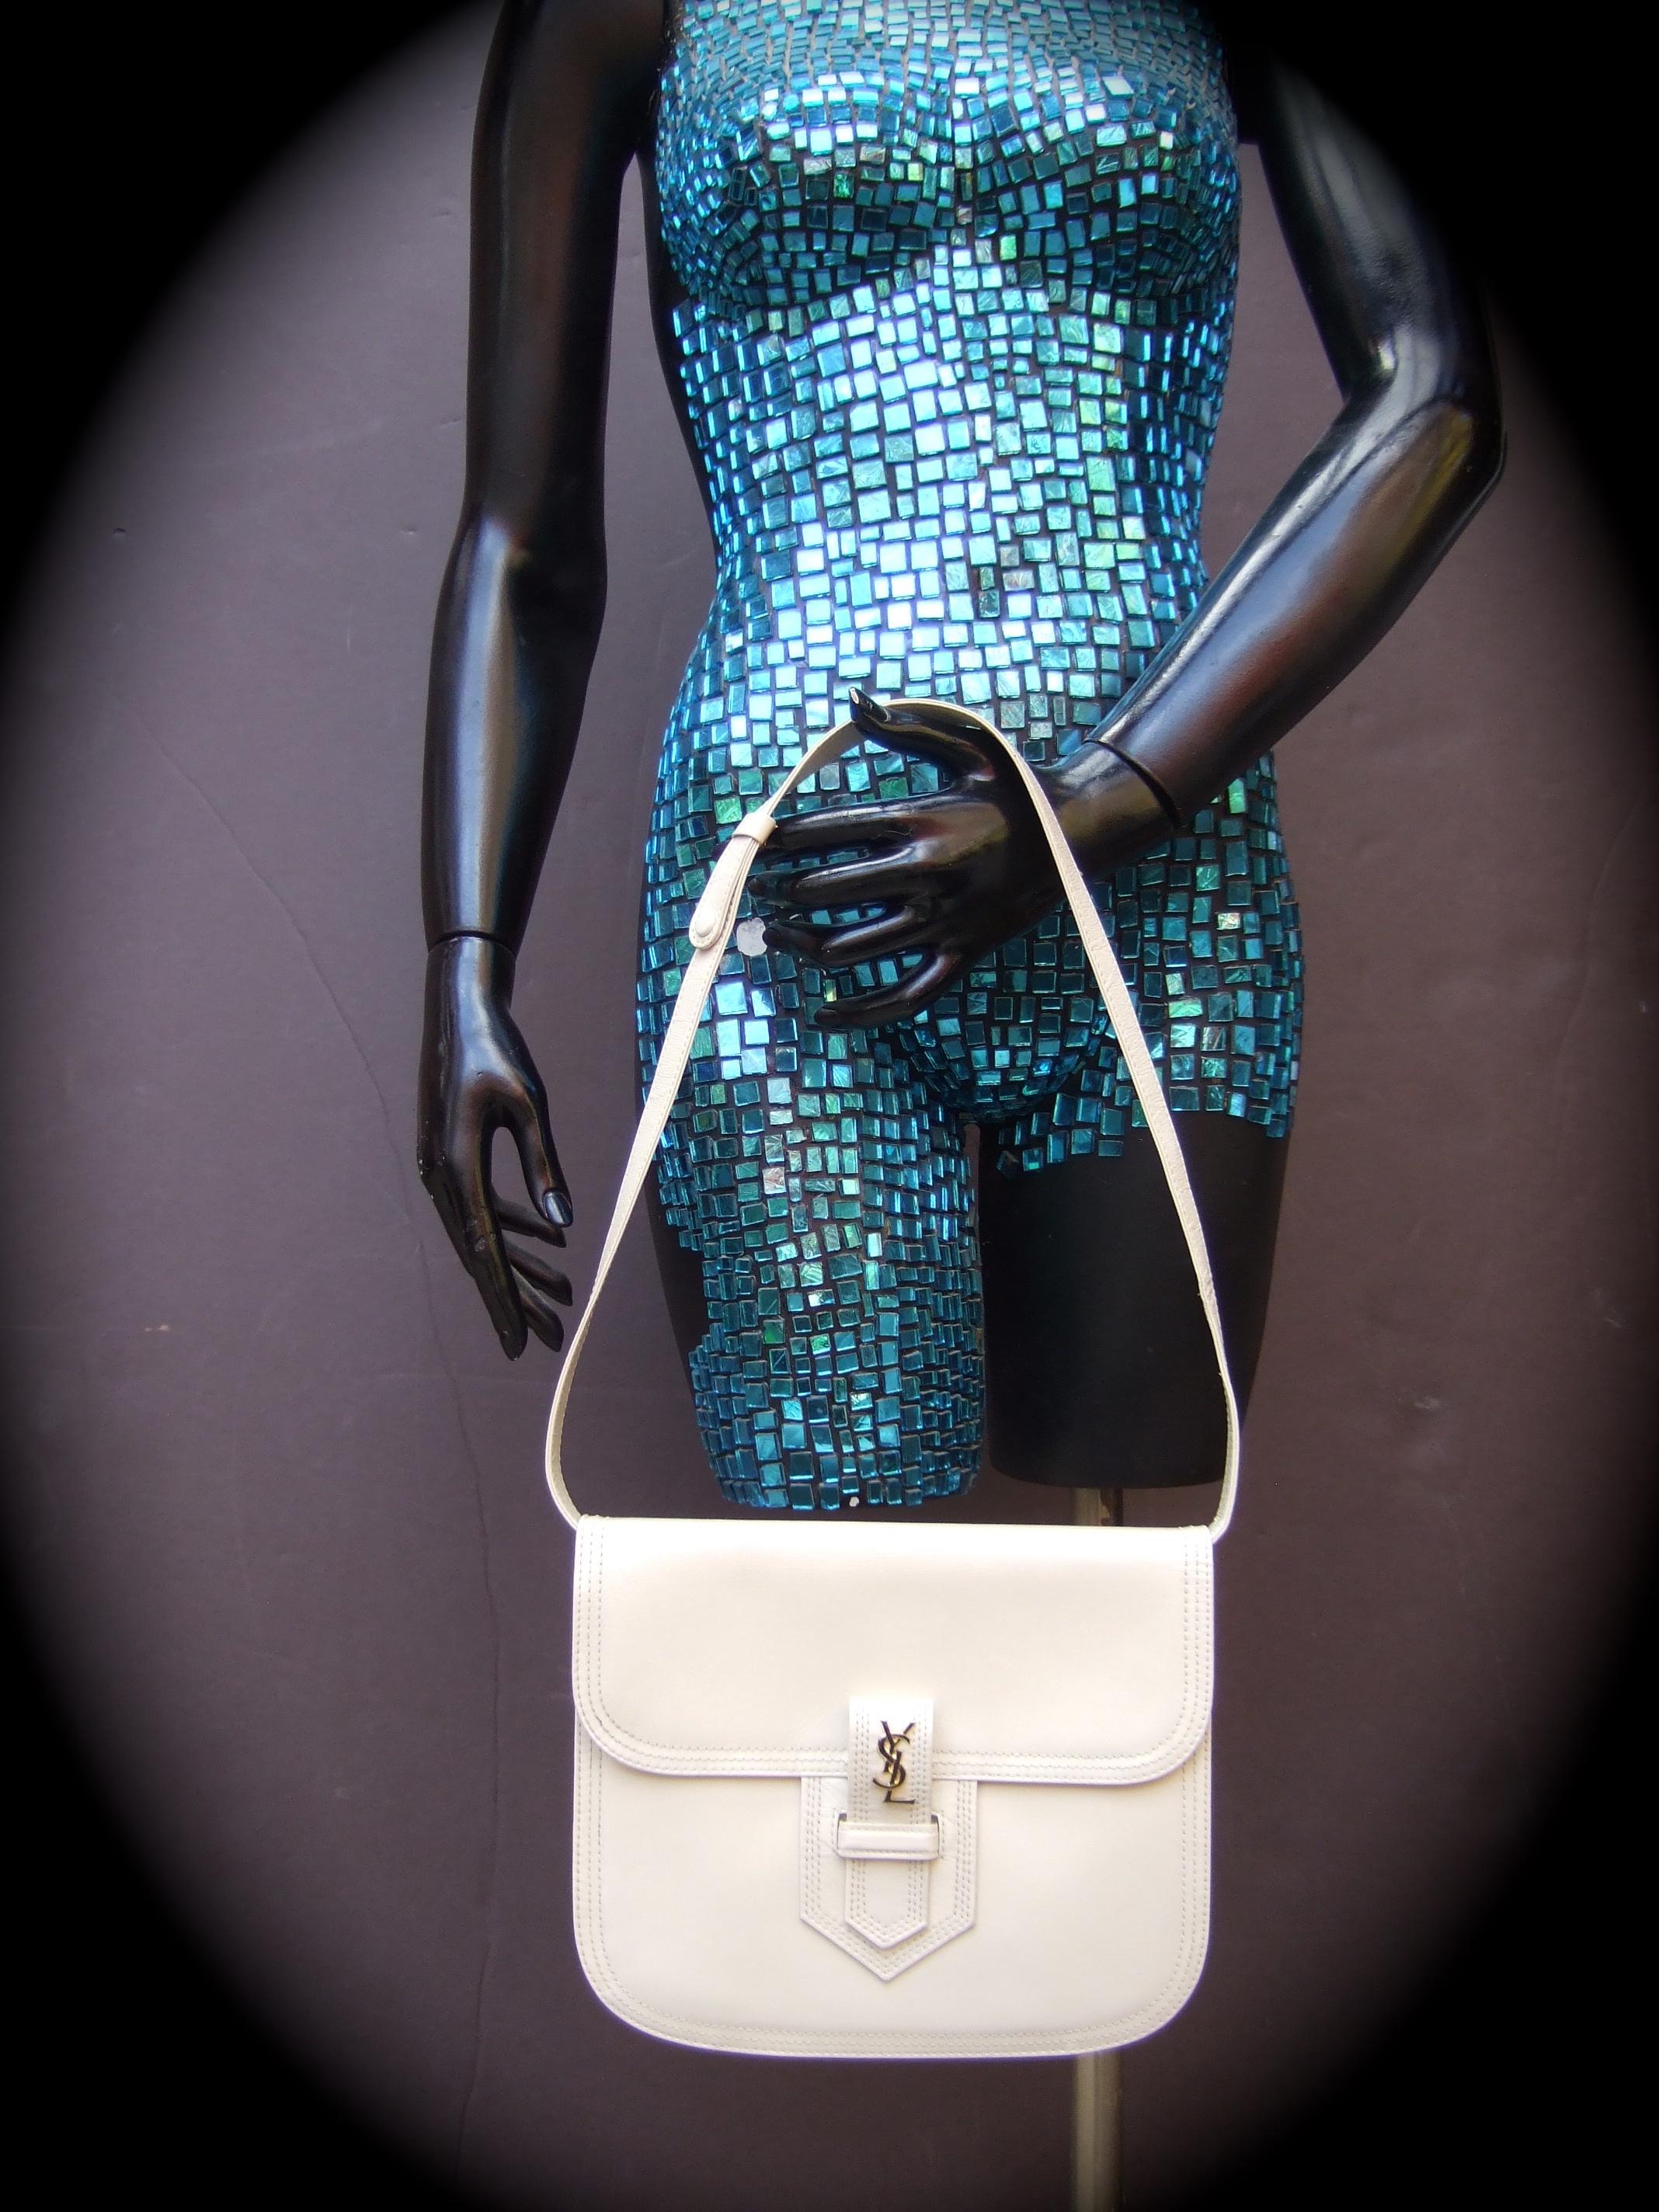 Yves Saint Laurent Chic taupe - bone color leather versatile handbag c 1980s 
The unique small size handbag converts from a chic clutch bag into a stylish
shoulder bag carried with the detachable matching  leather shoulder strap 

Adorned with Saint